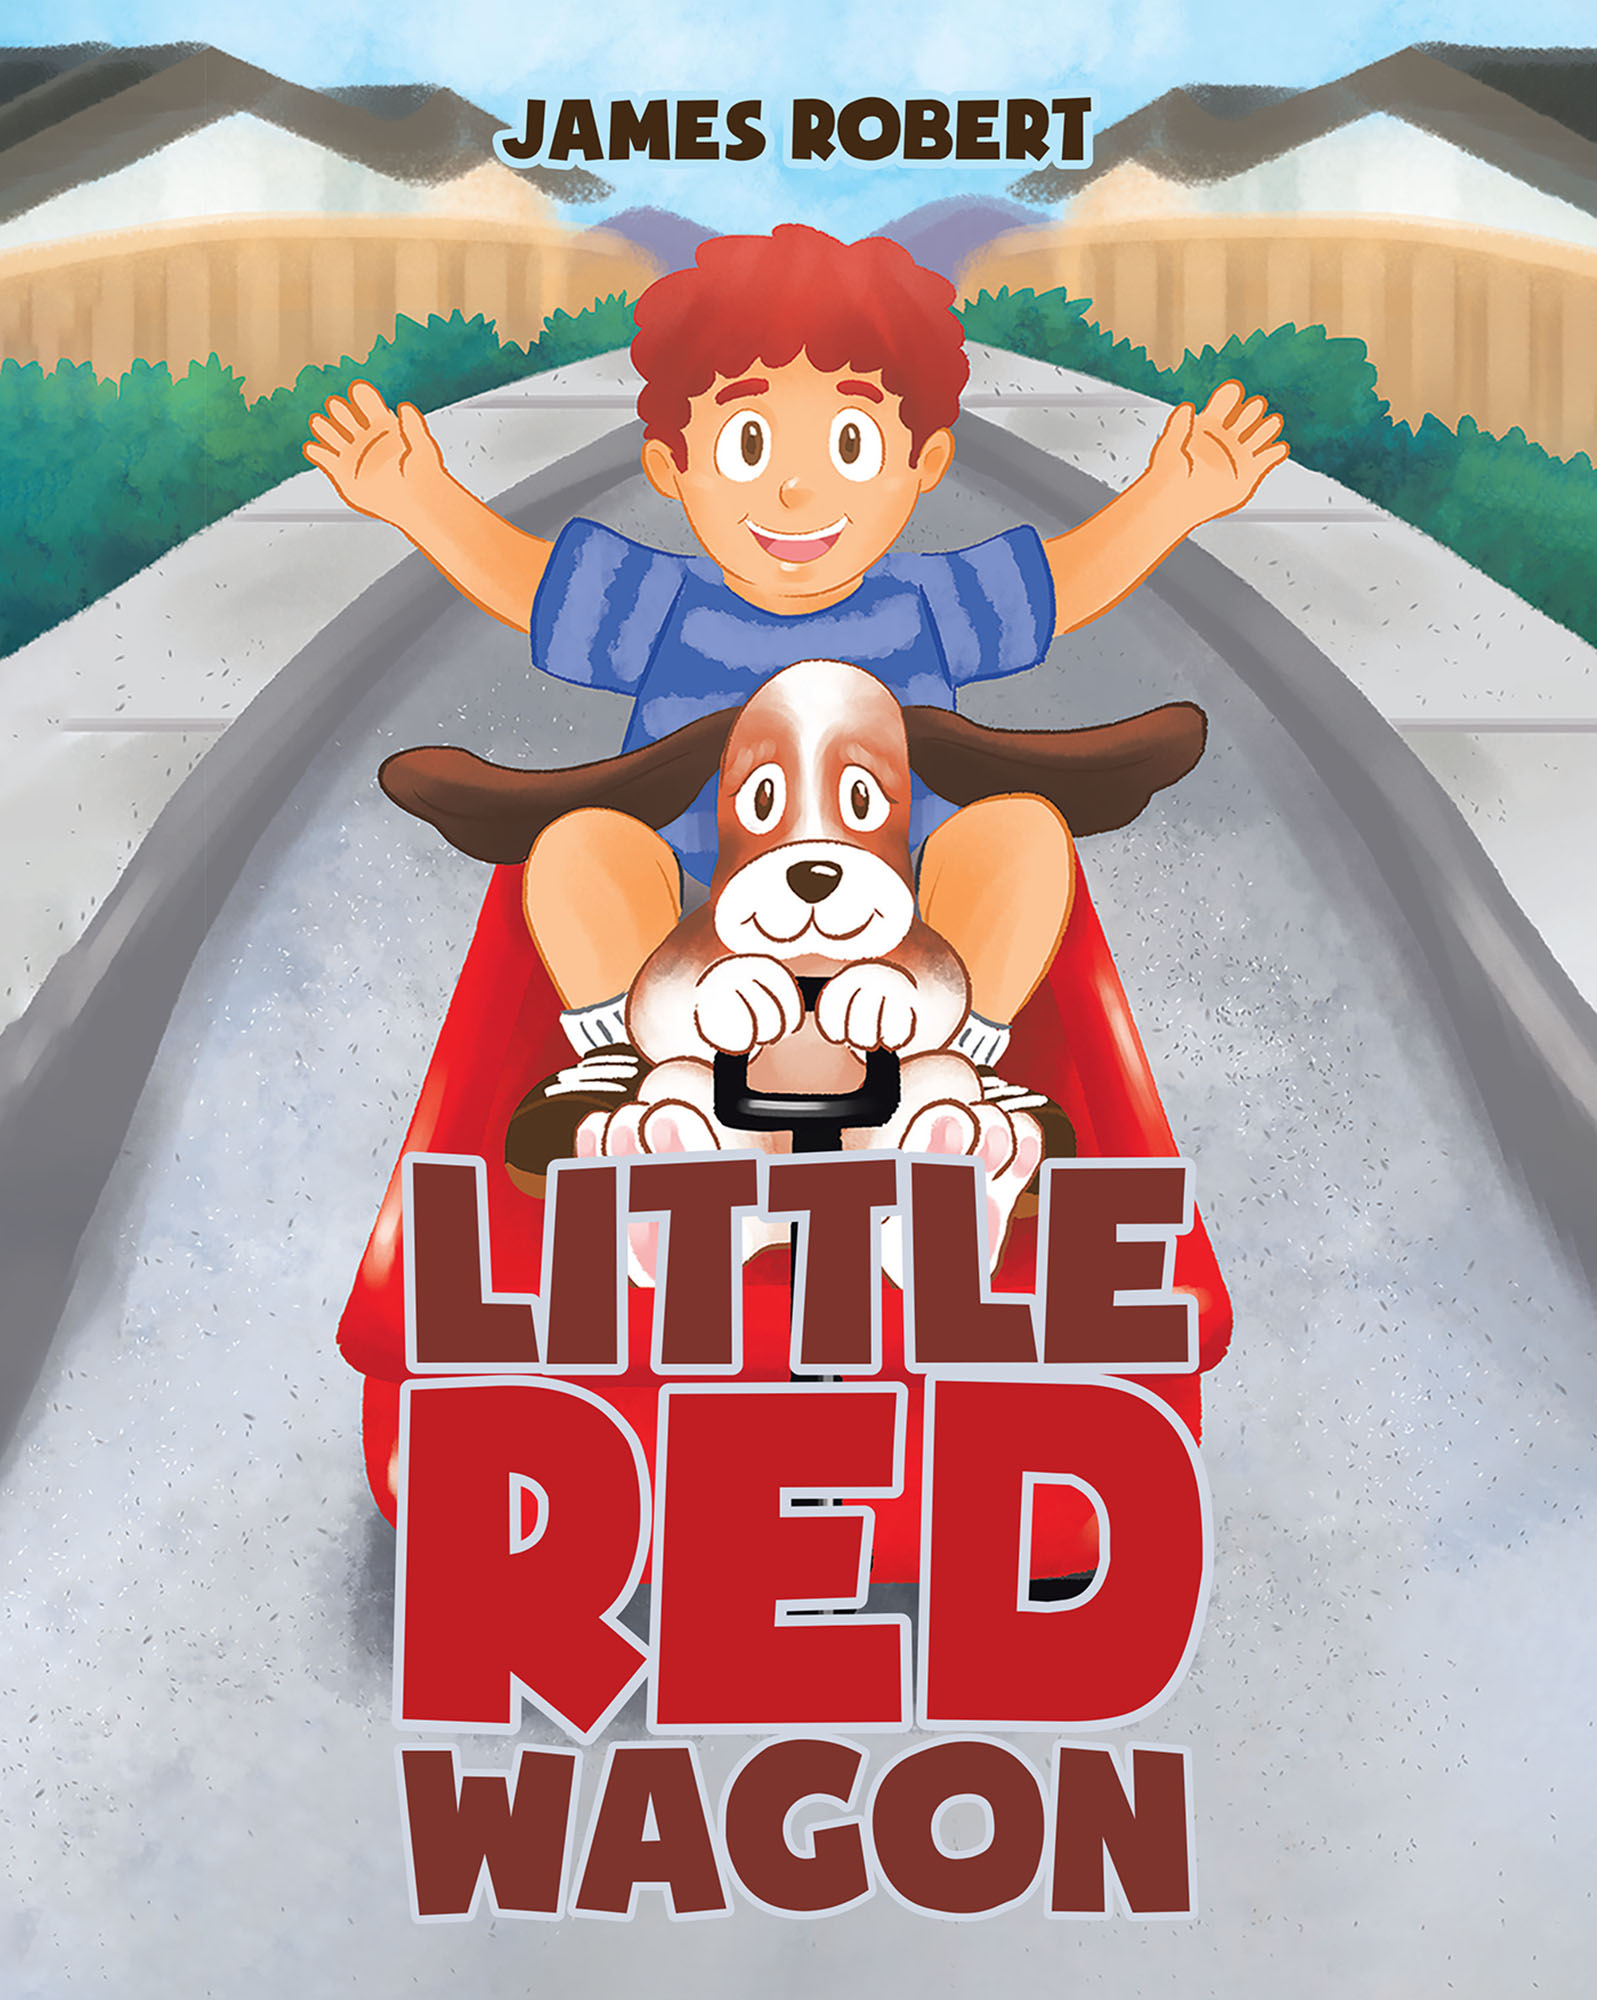 Little Red Wagon Cover Image